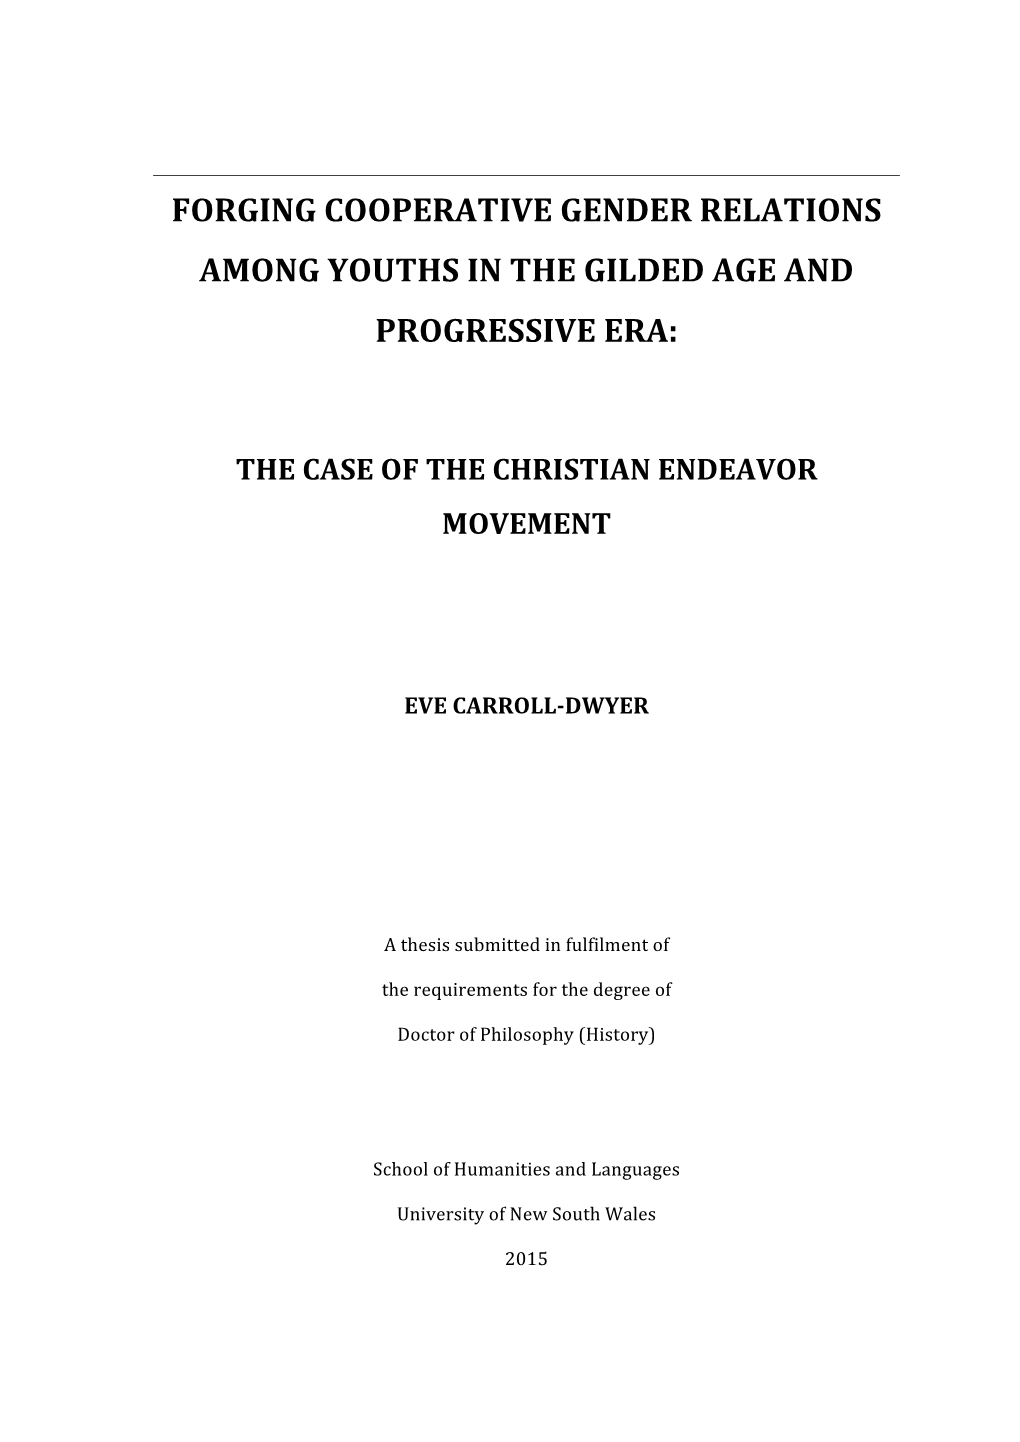 Forging Cooperative Gender Relations Among Youths in the Gilded Age and Progressive Era